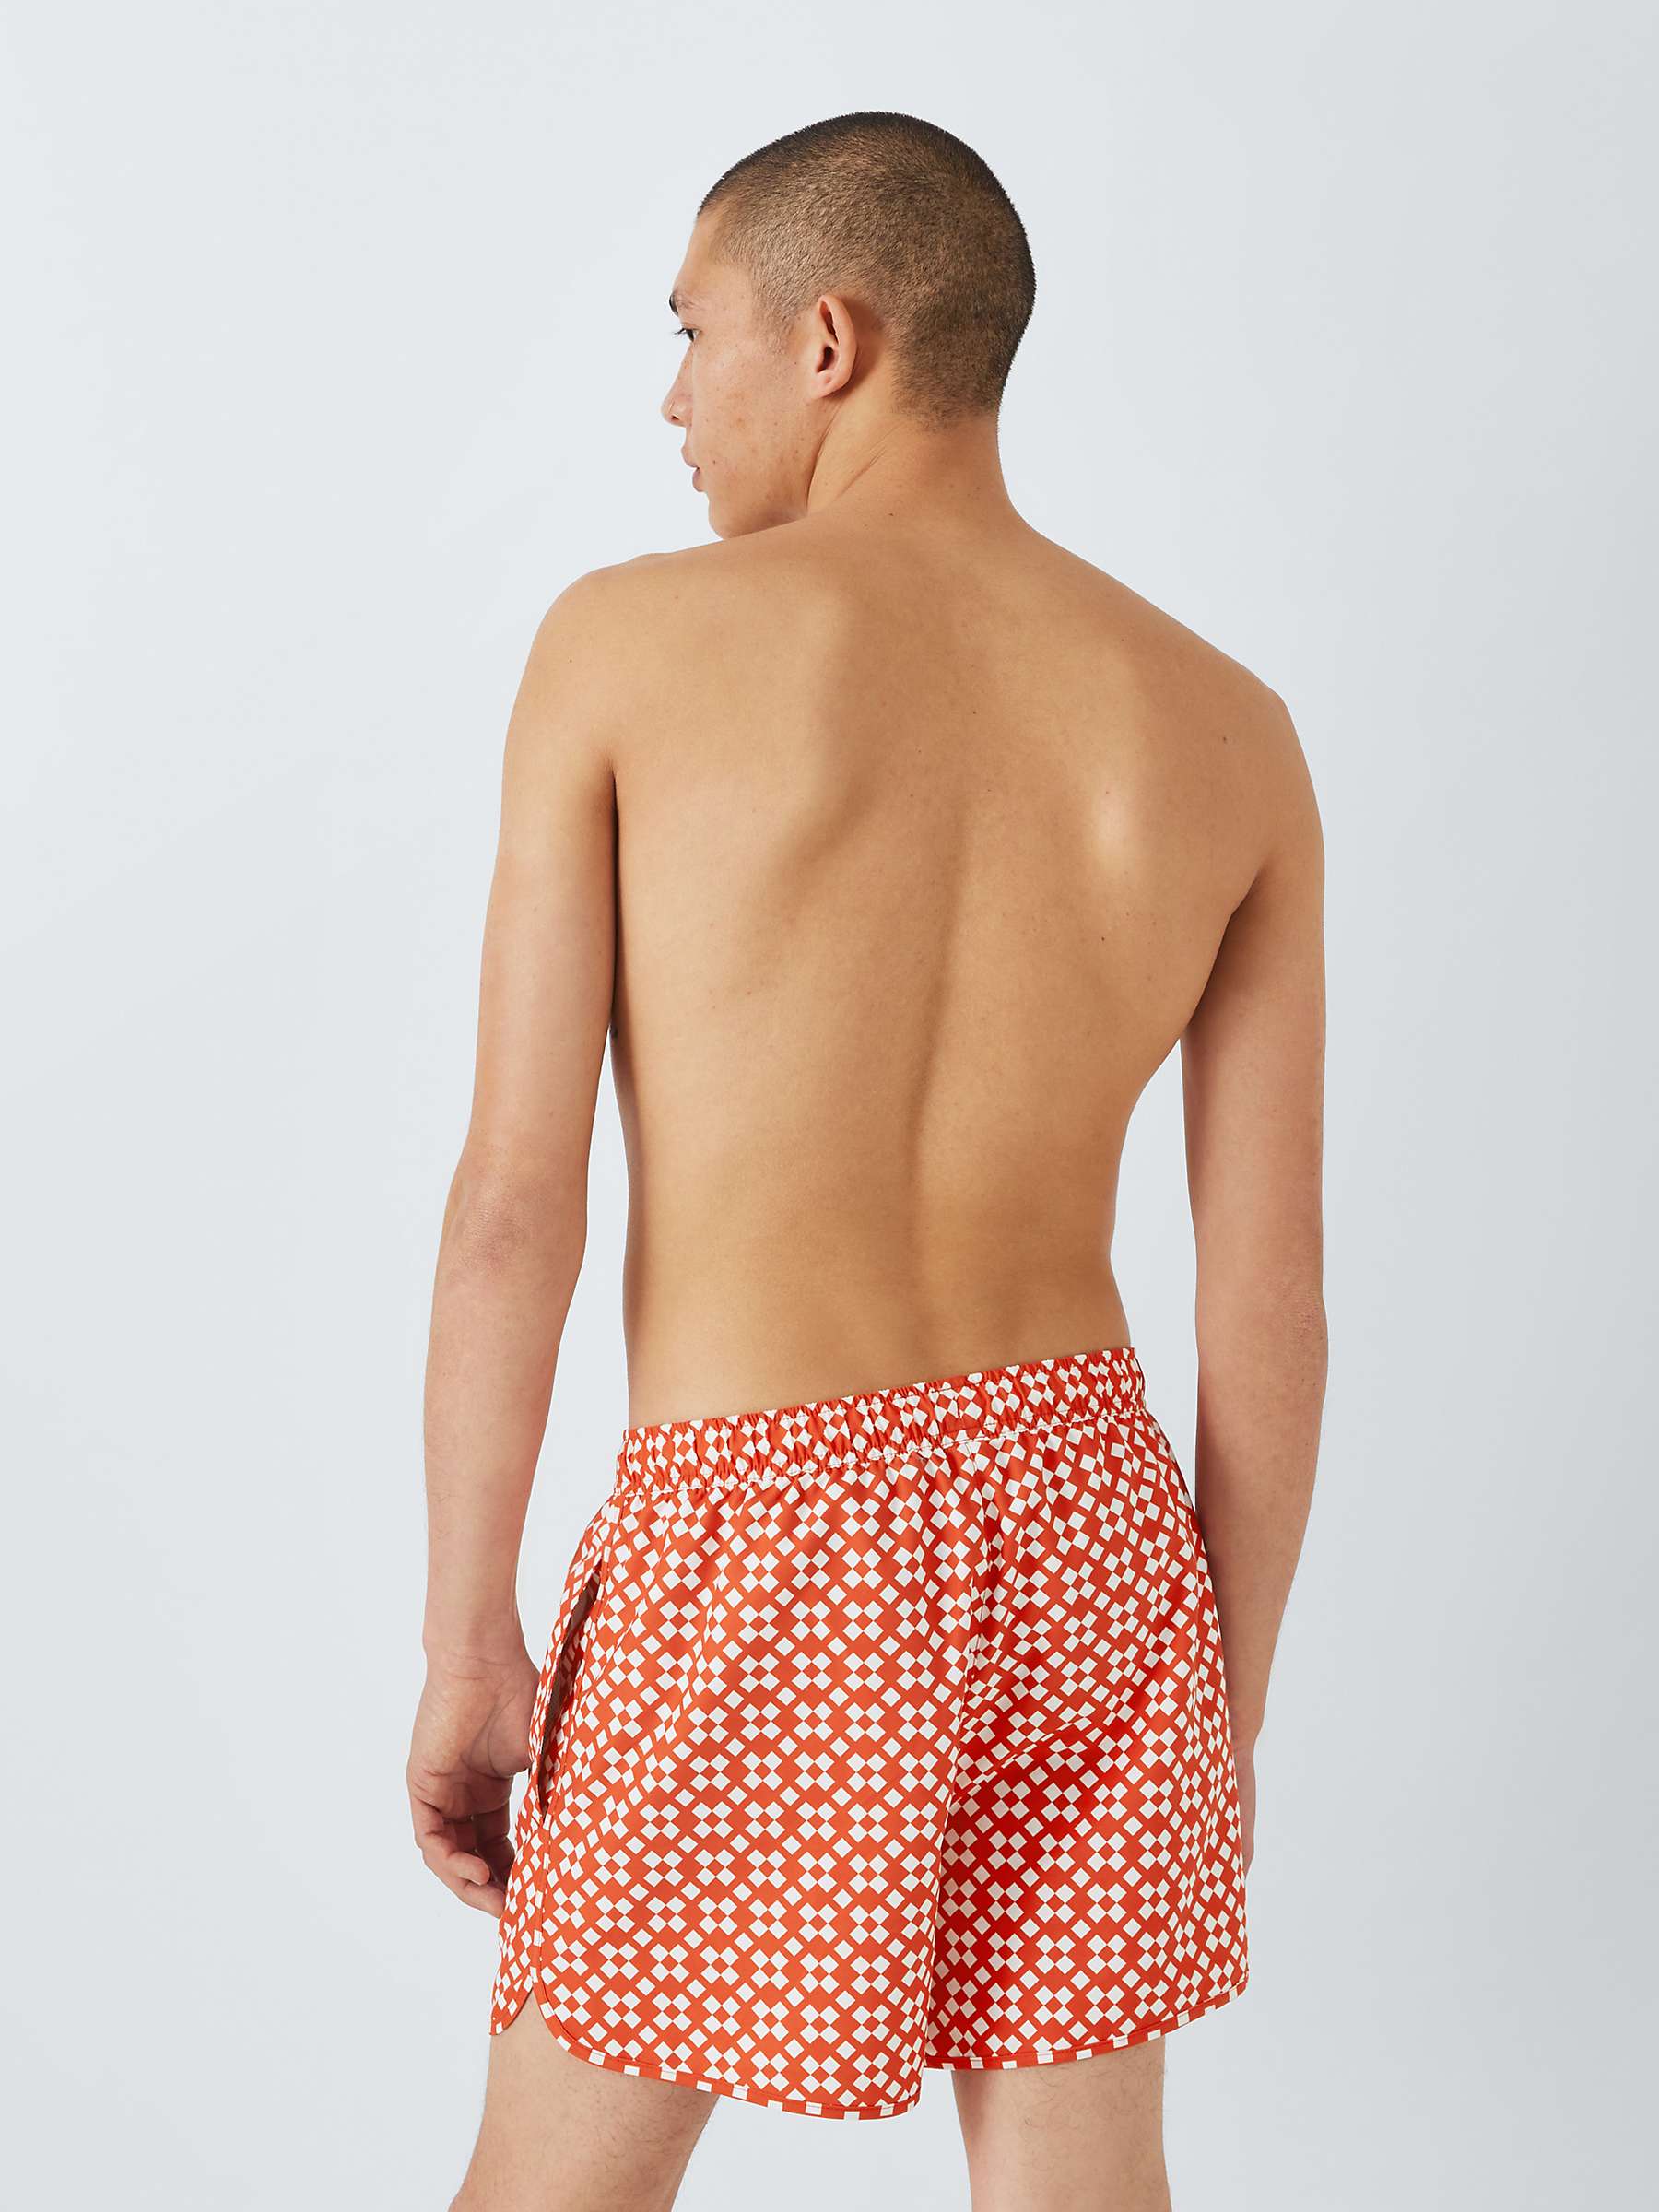 Buy John Lewis ANYDAY Tile Print Recycled Swim Shorts, Red/Multi Online at johnlewis.com